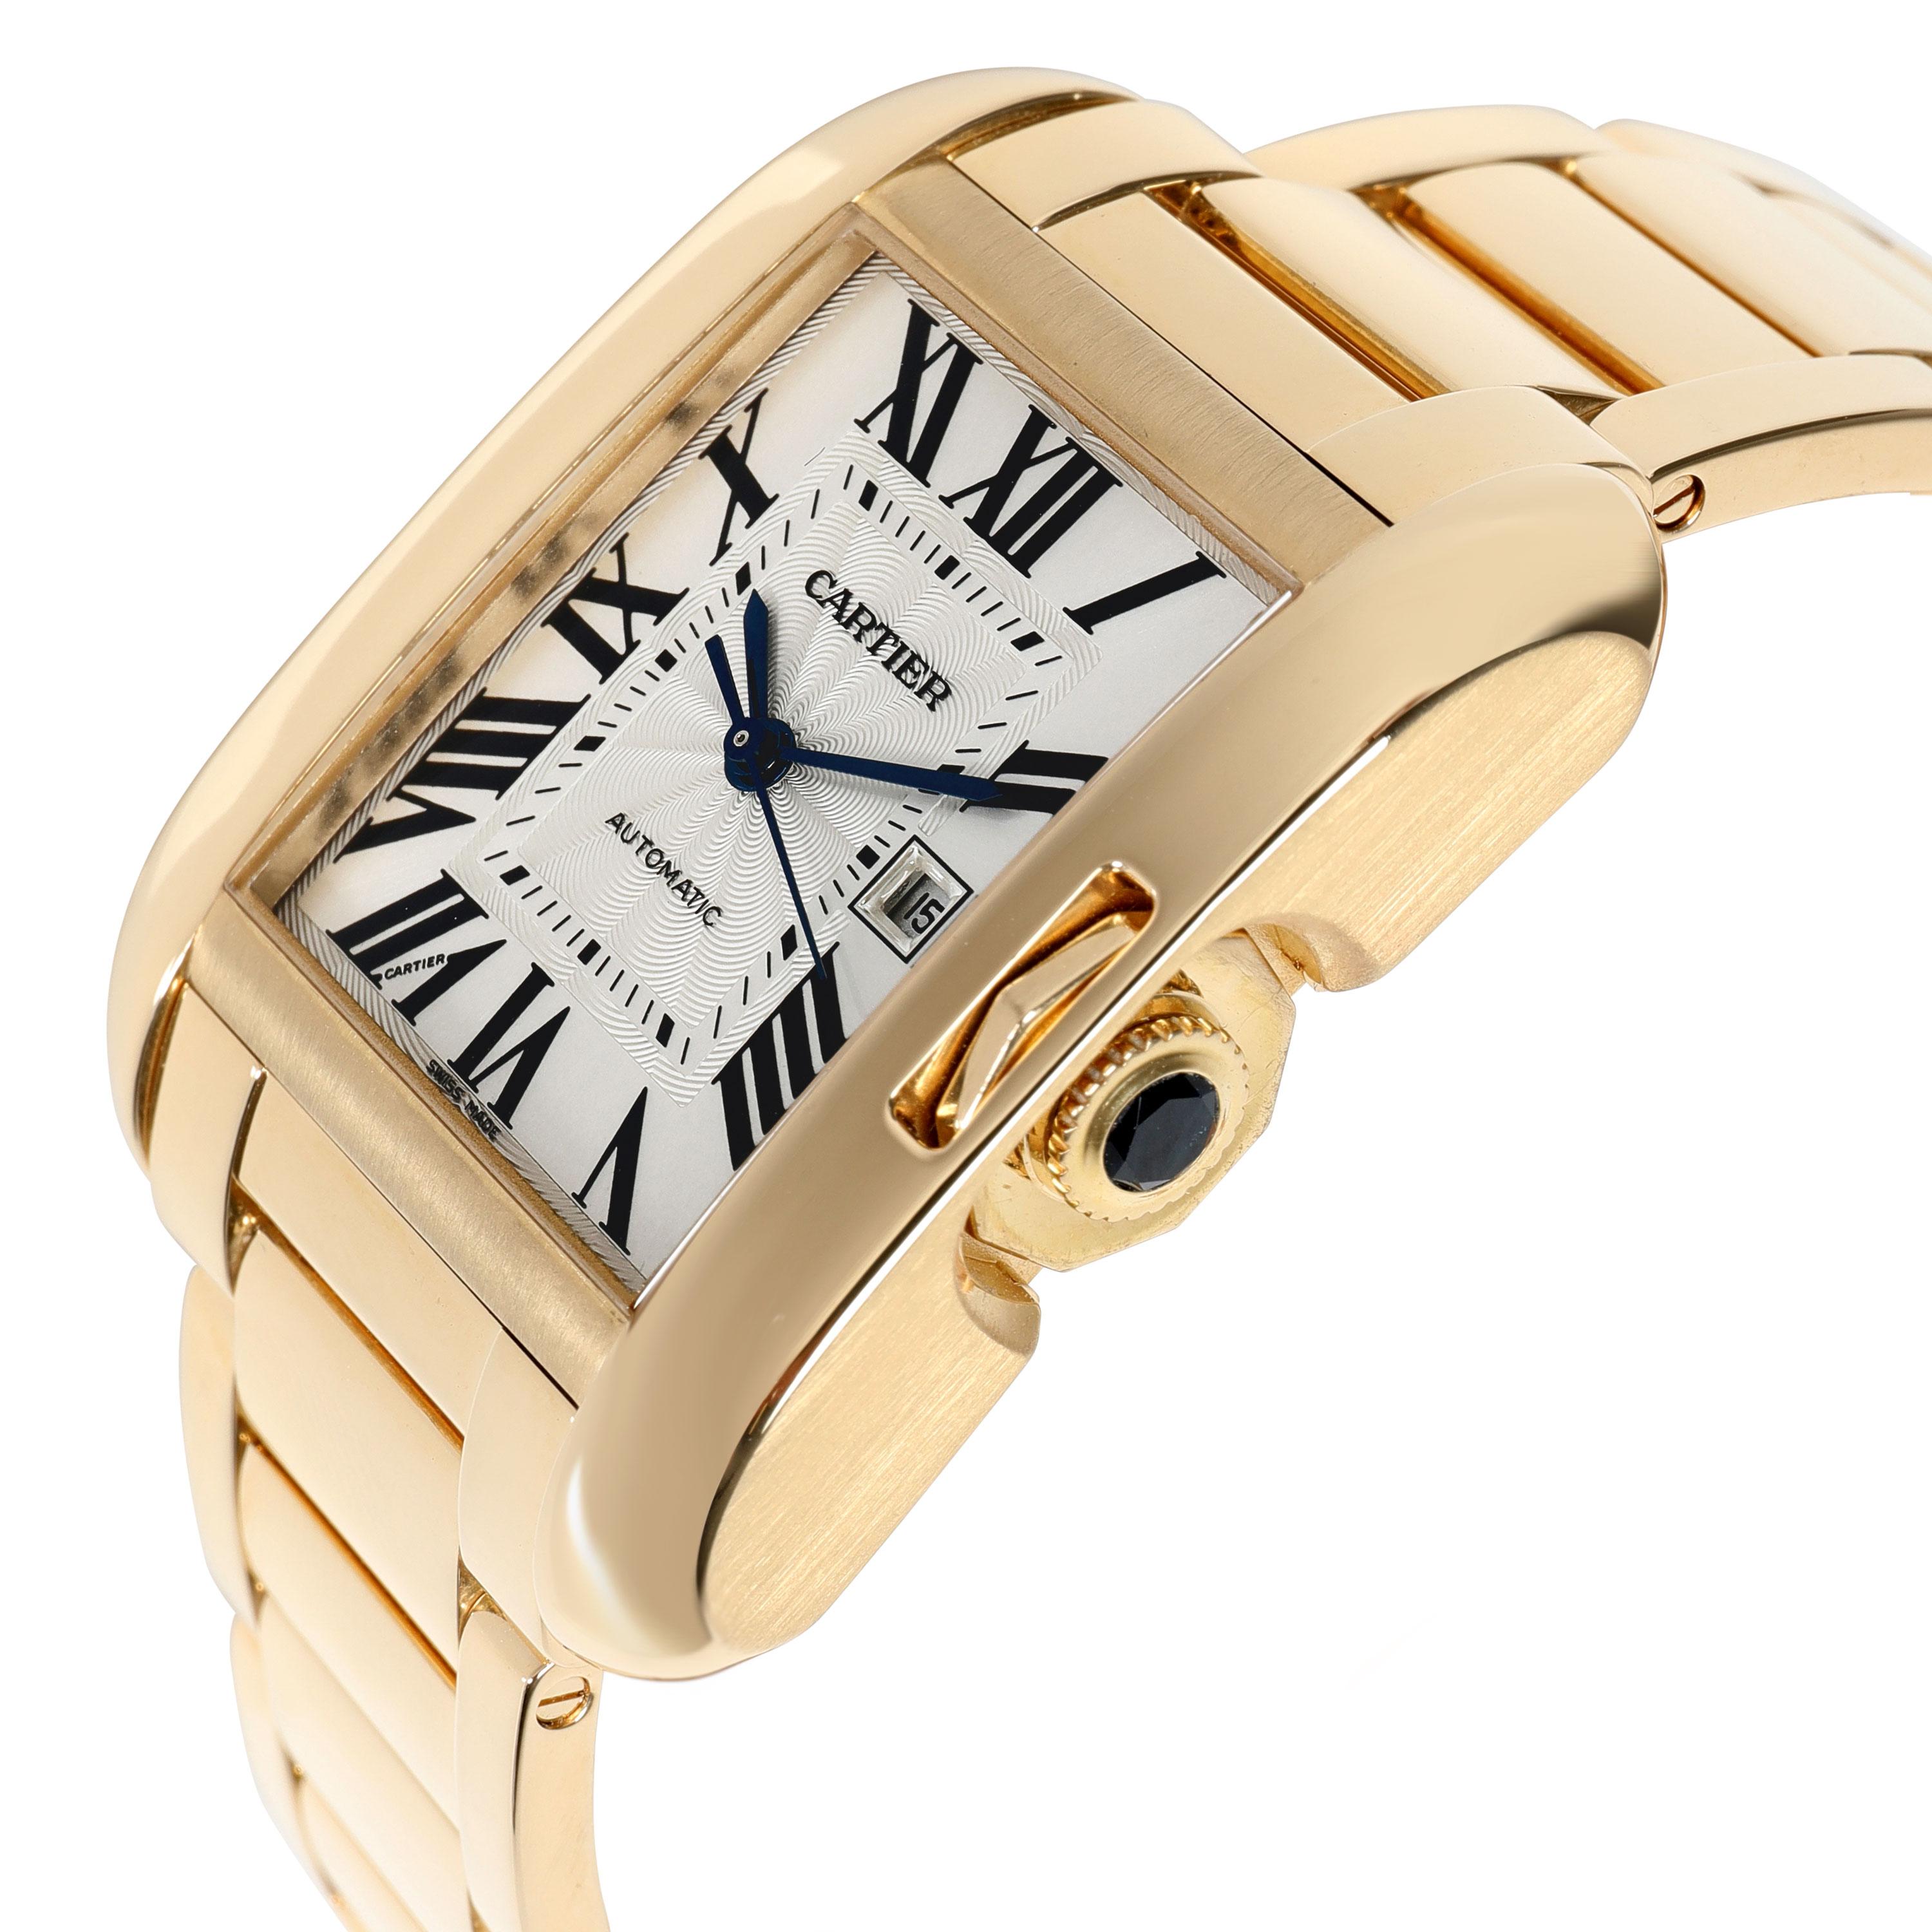 

Cartier Tank Anglaise W5310002 Men's Watch in 18kt Rose Gold

SKU: 105267

PRIMARY DETAILS
Brand:  Cartier
Model: Tank Anglaise
Serial Number: ***
Country of Origin: Switzerland
Movement Type: Mechanical: Automatic/Kinetic
Refurbished Notes: